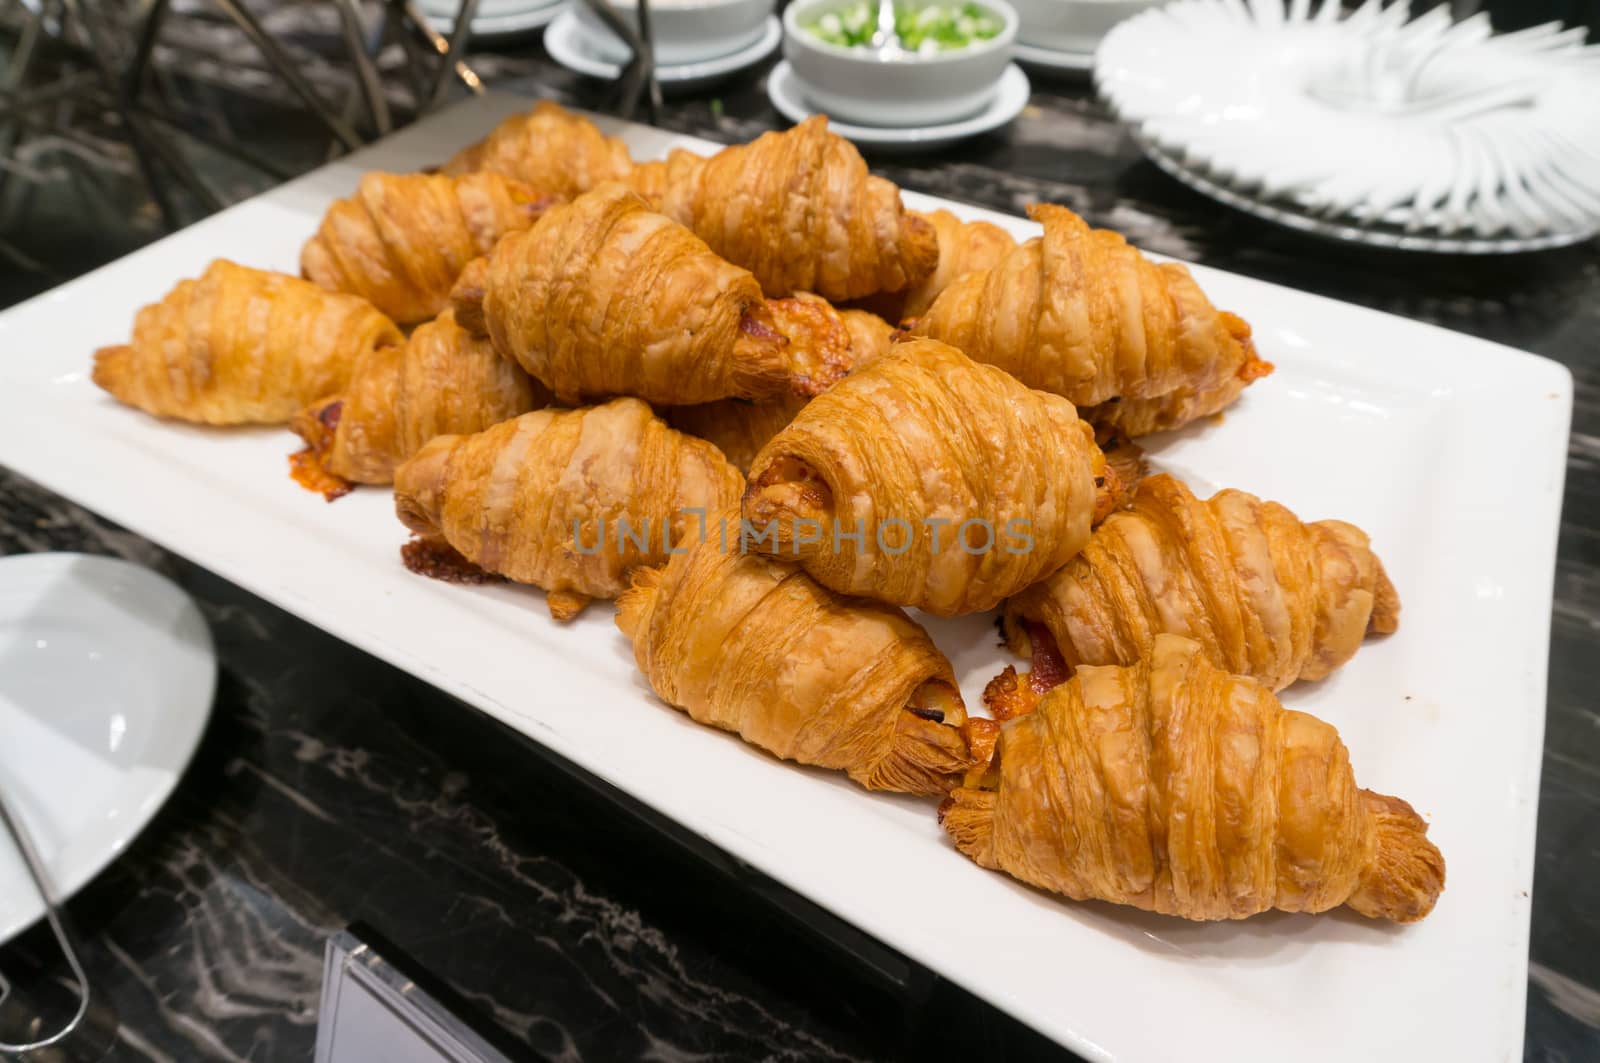 Ham and Cheese Croissant in the Plate, Ready to Serve